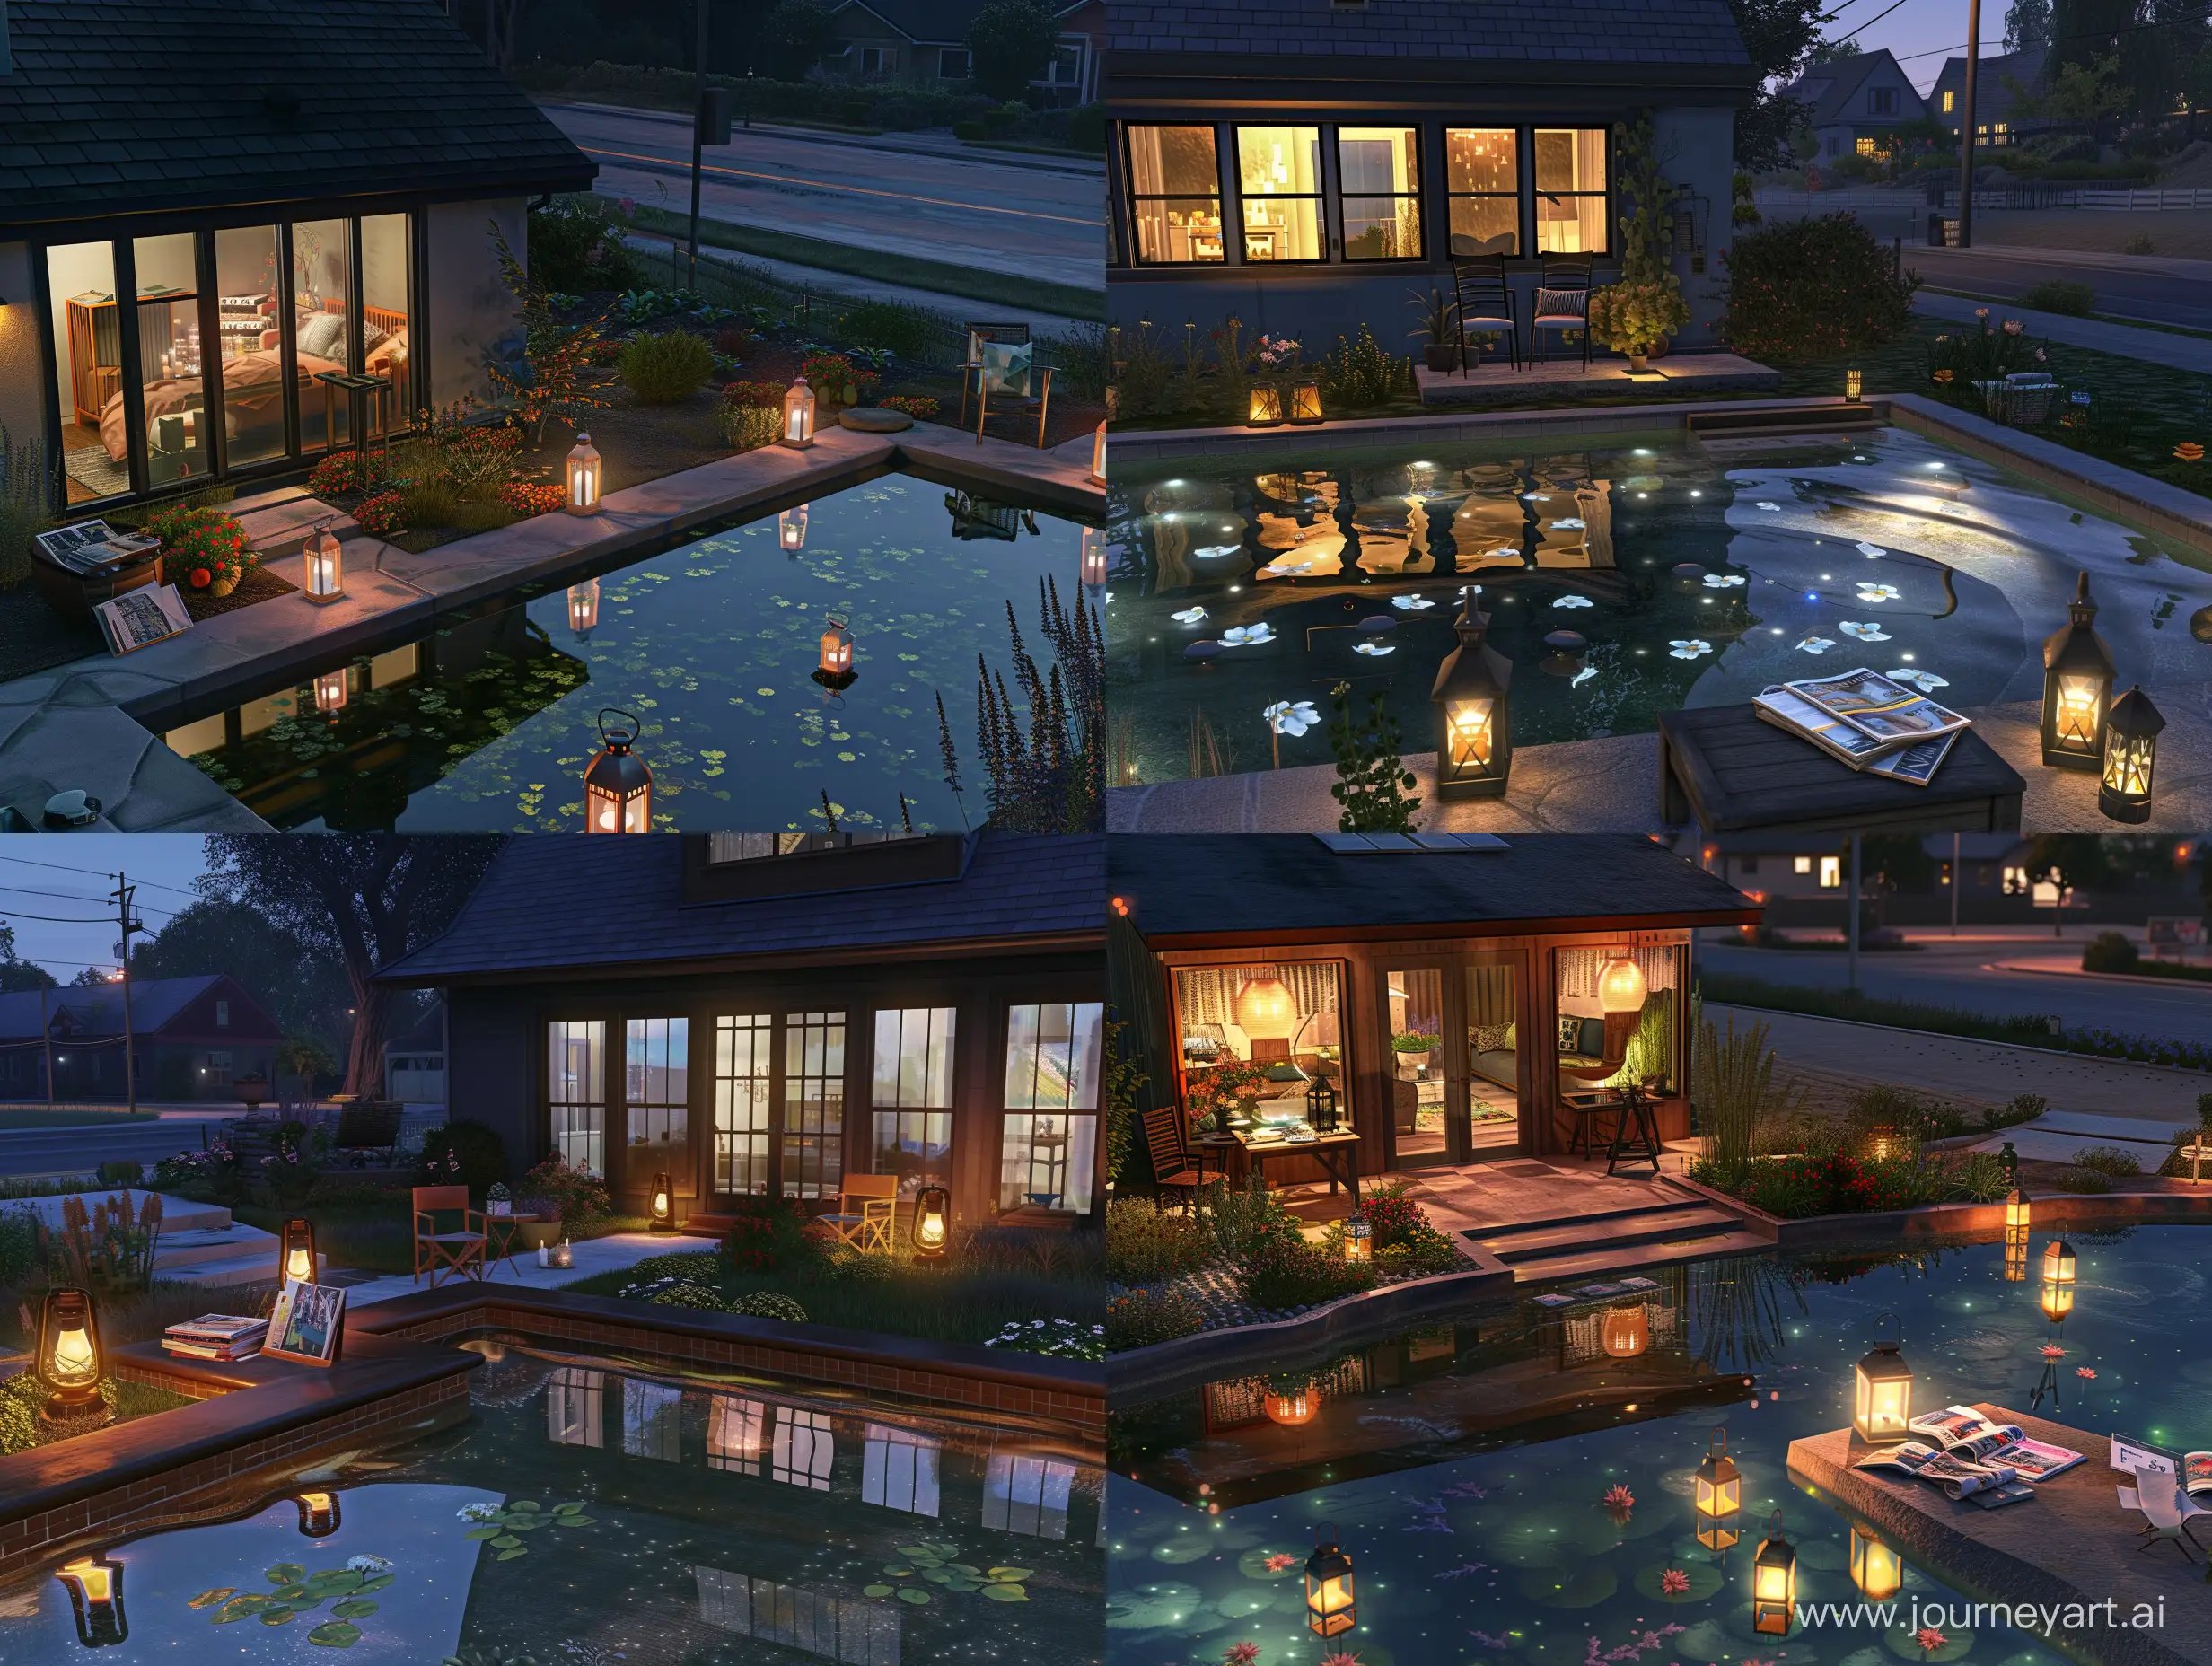 Modern-American-Style-House-with-Backyard-Garden-and-Pool-at-Night